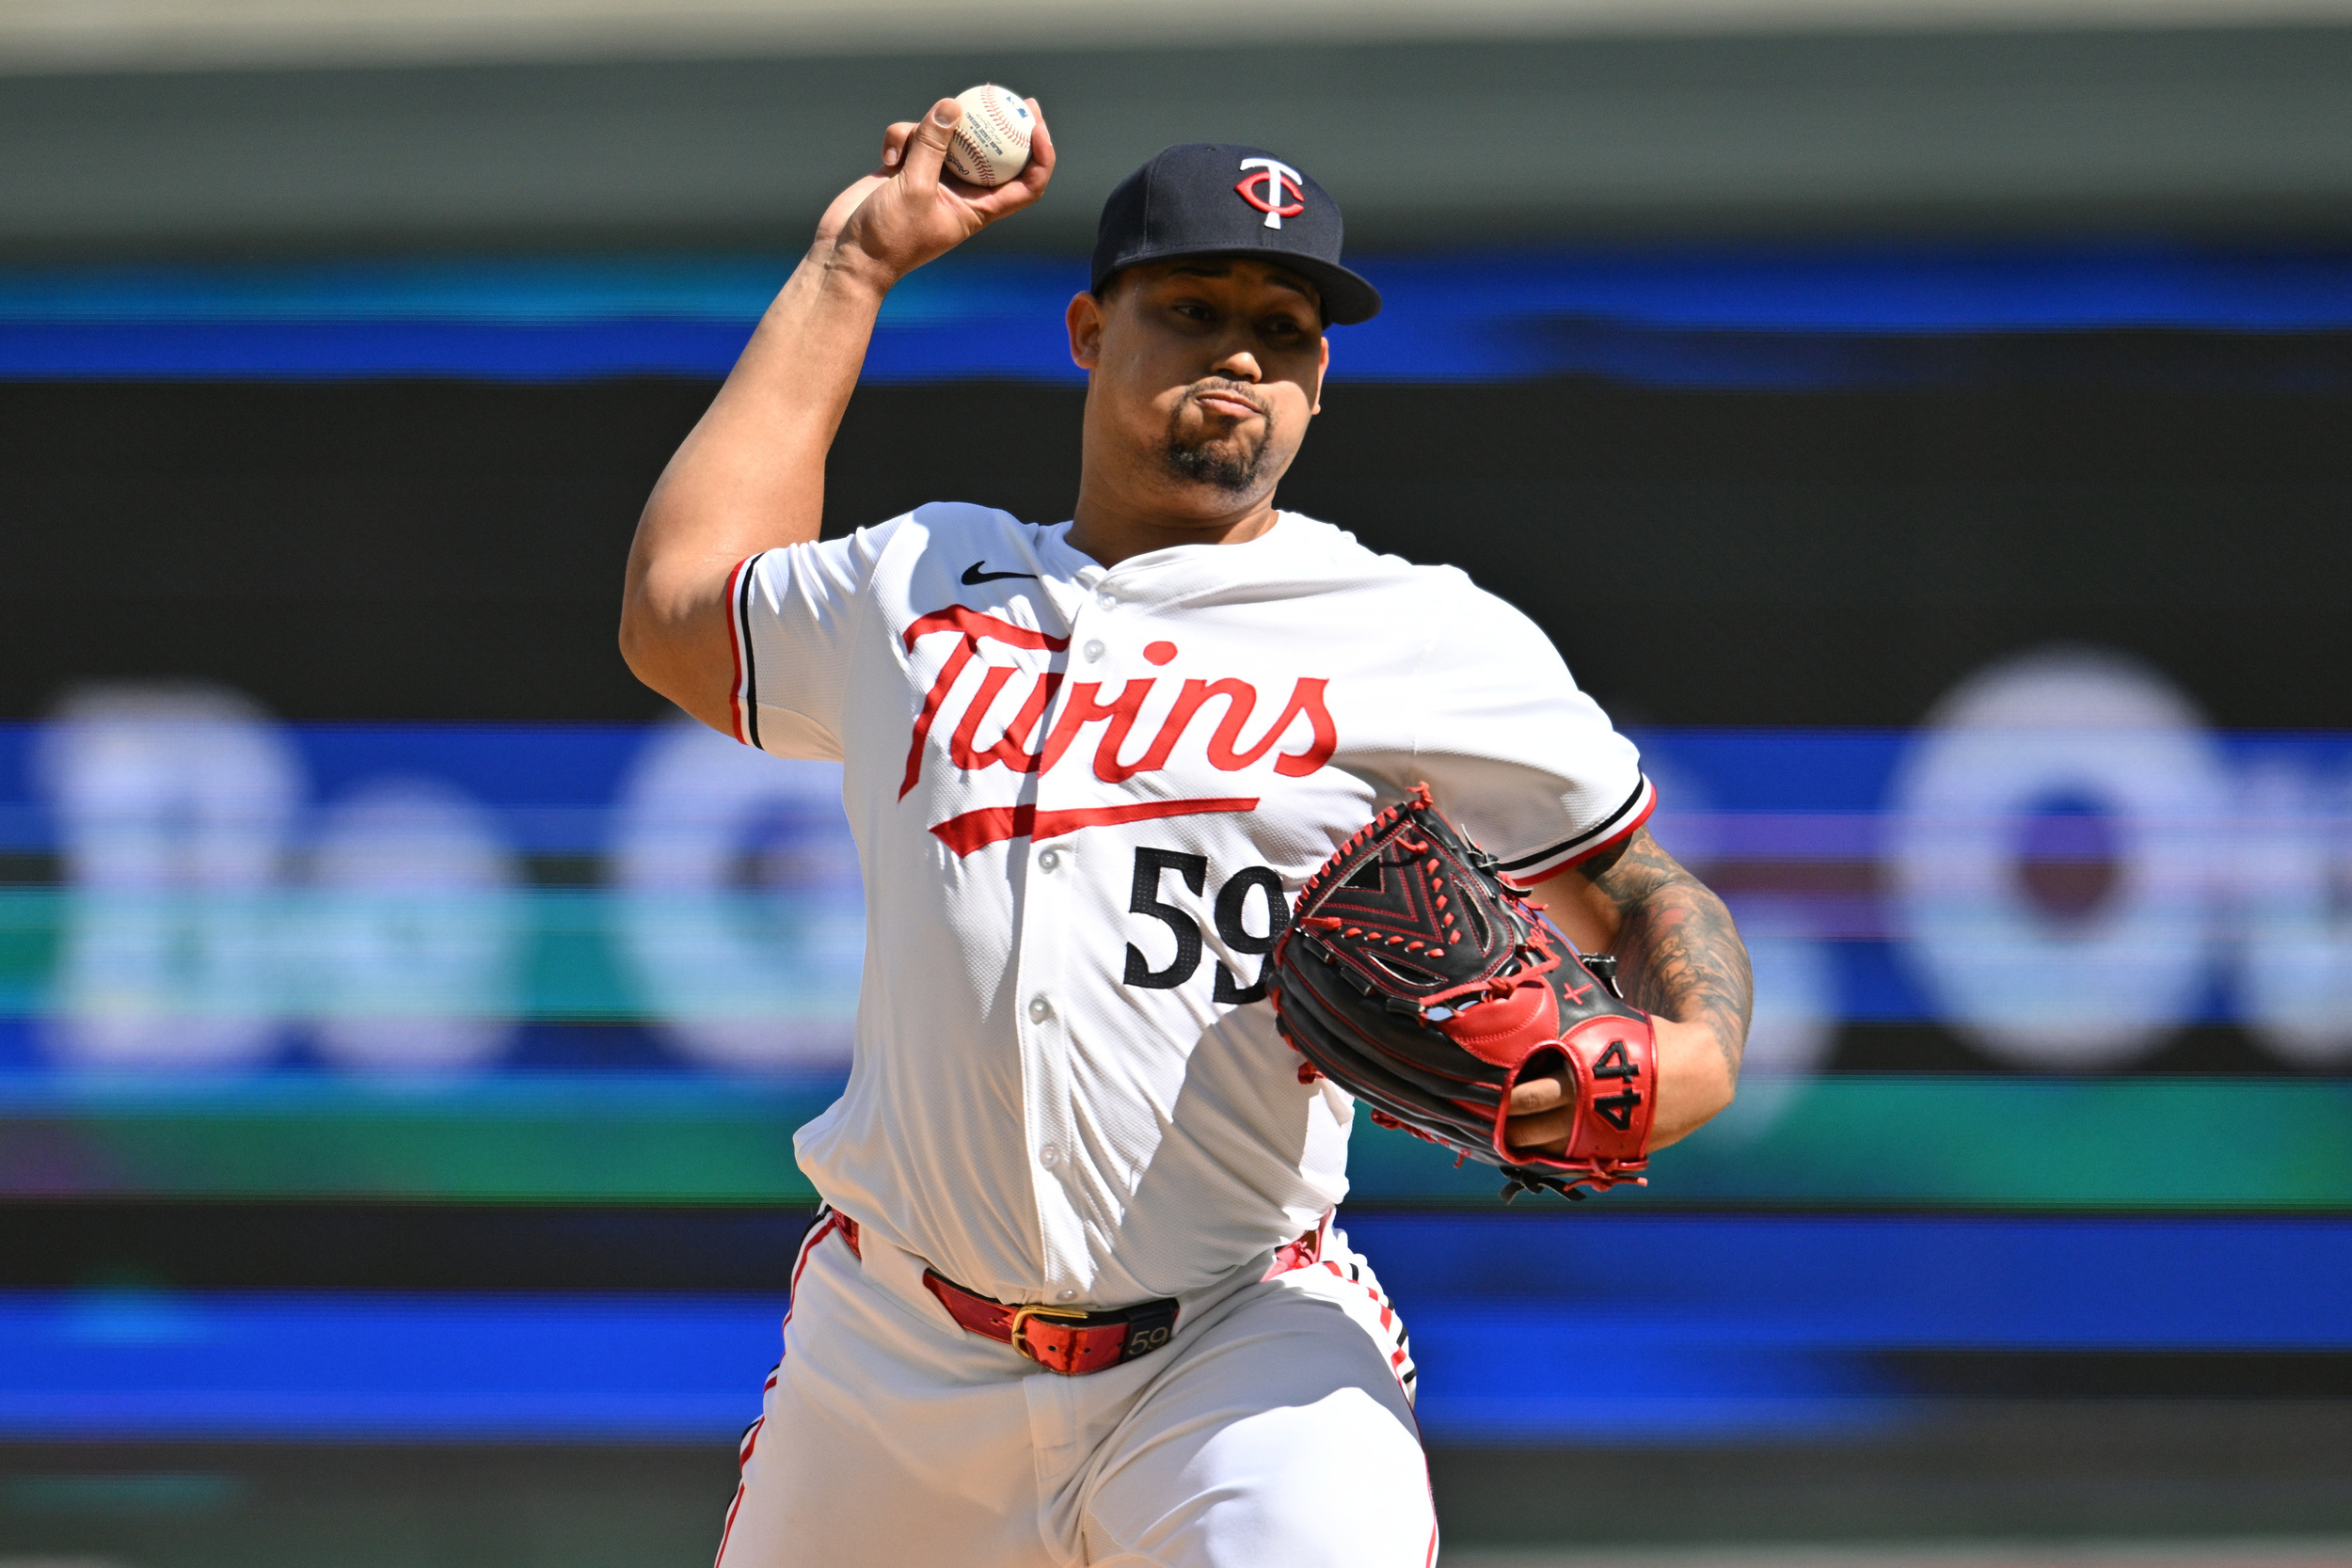 twins closer has the best entrance in mlb